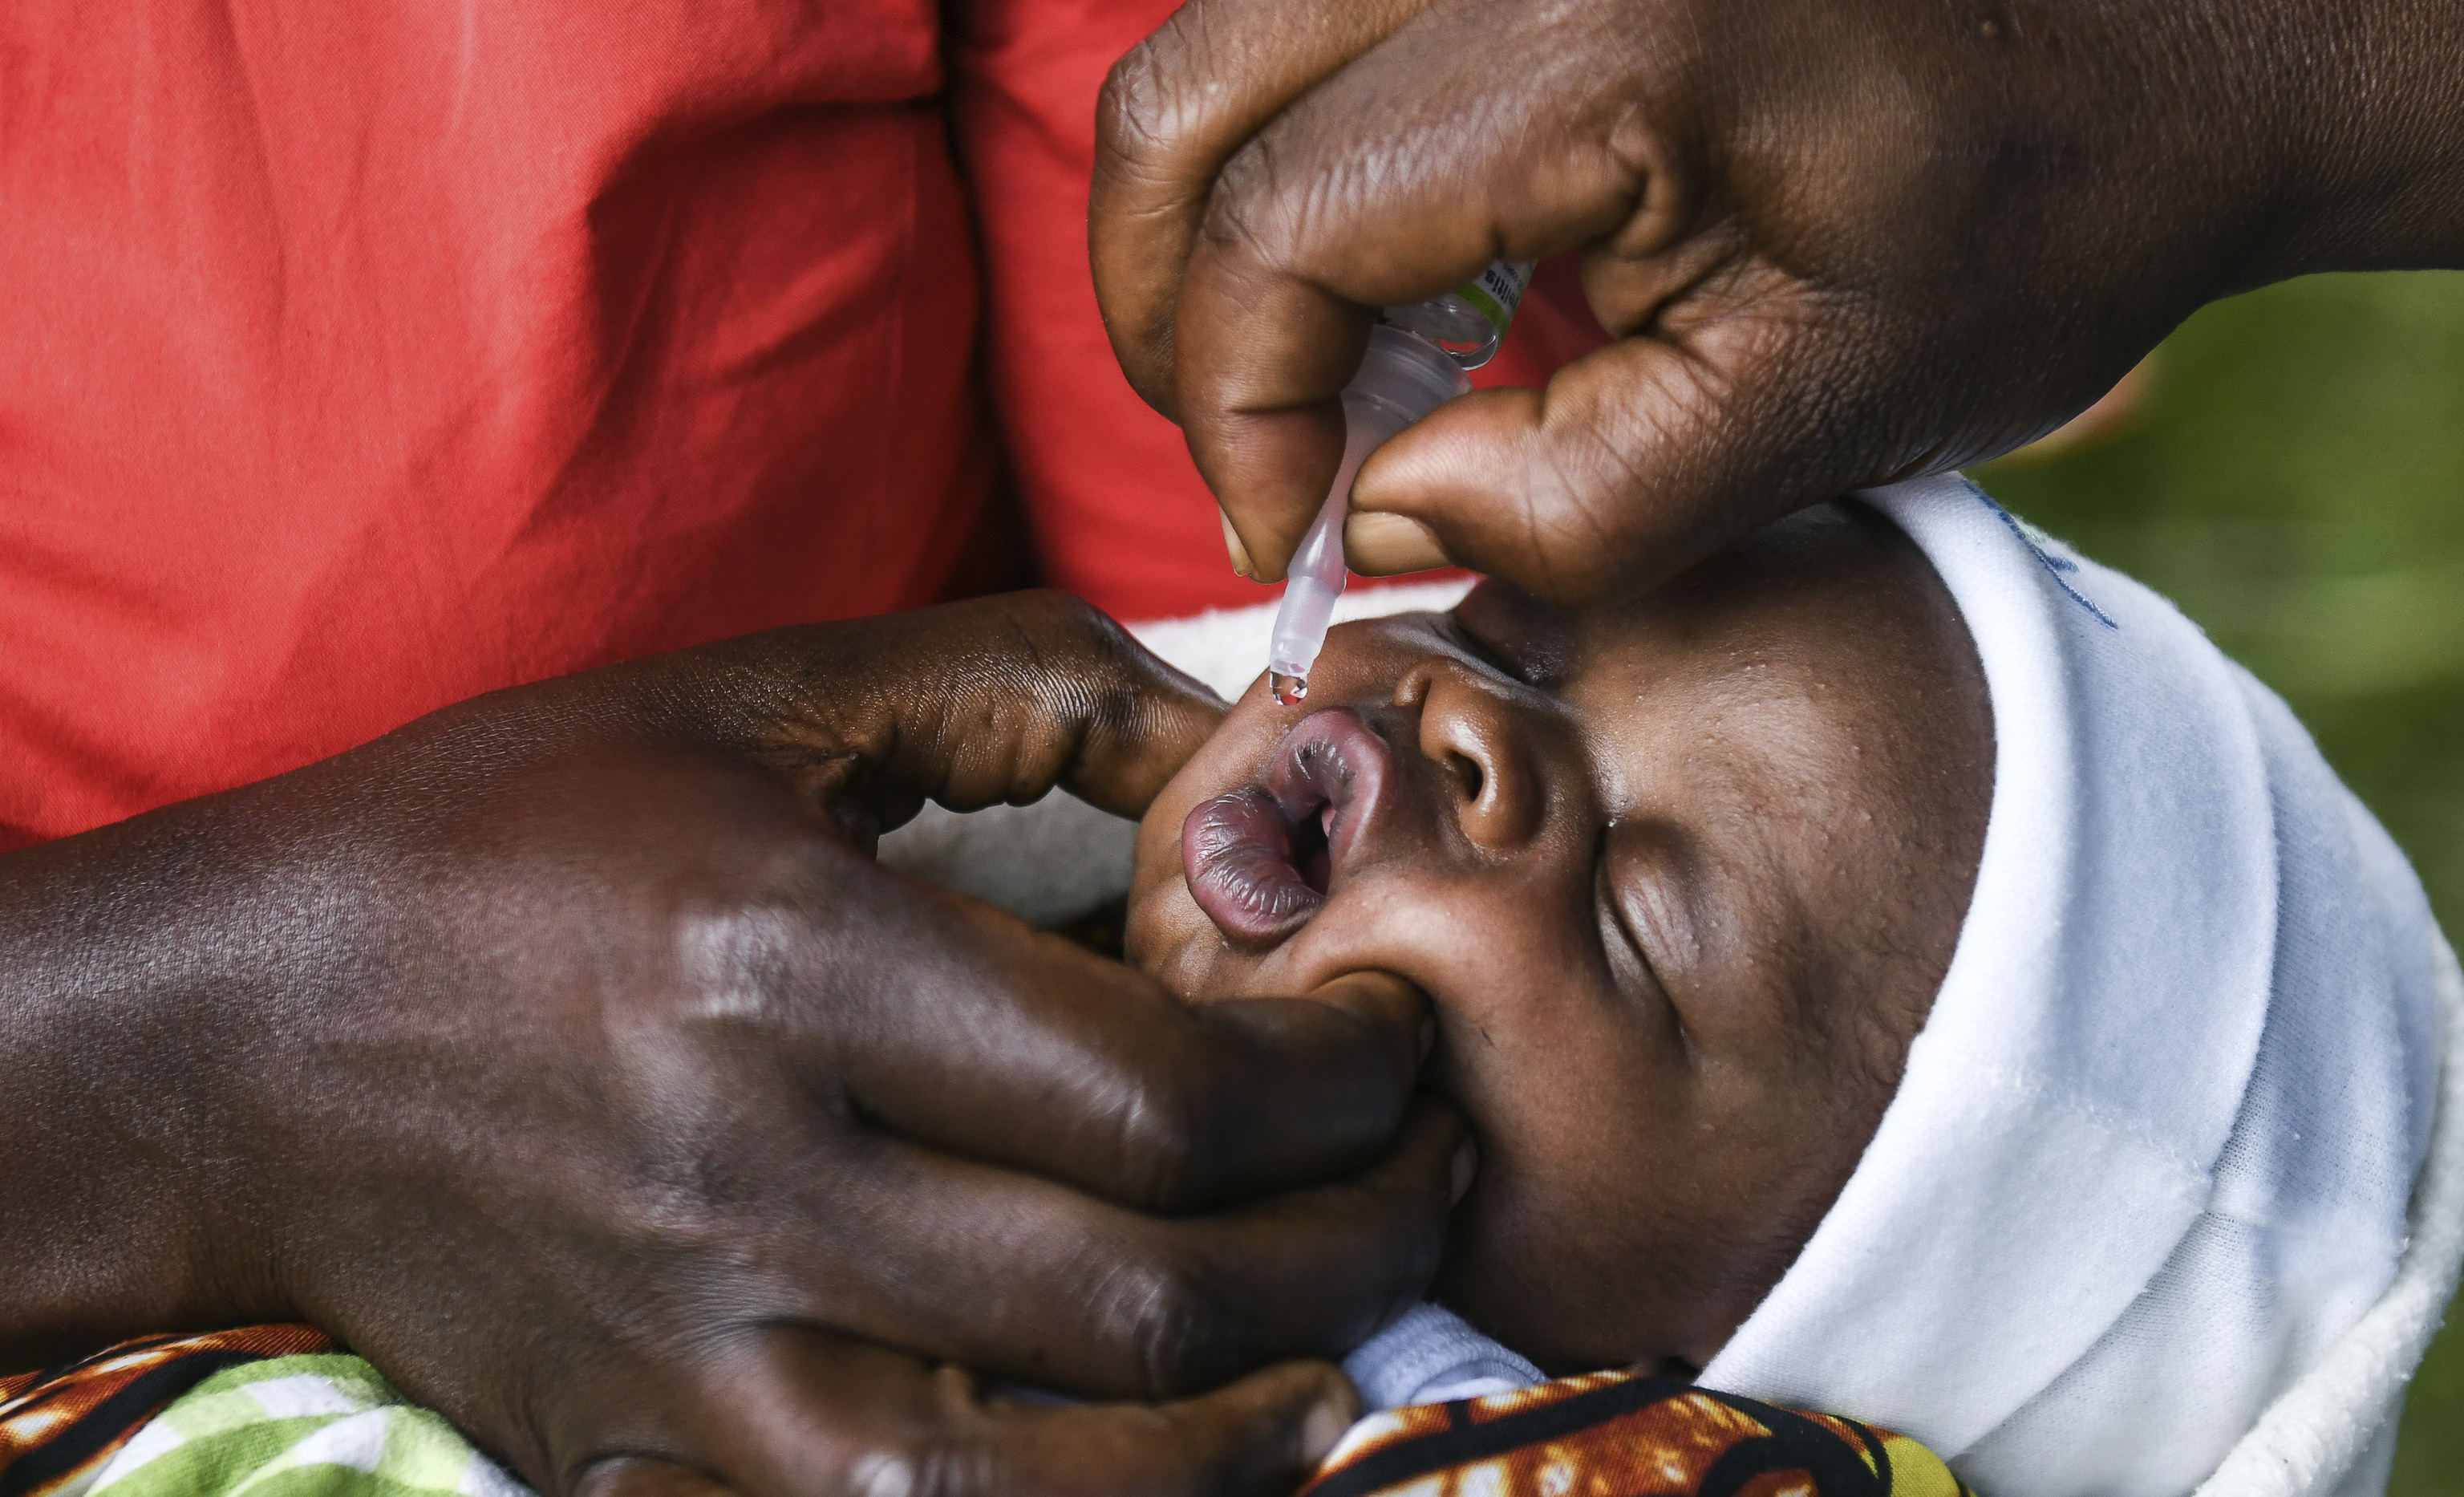 A baby receives a dose of the oral polio vaccine during the vaccination campaign against the infection in Malawi in 2020.